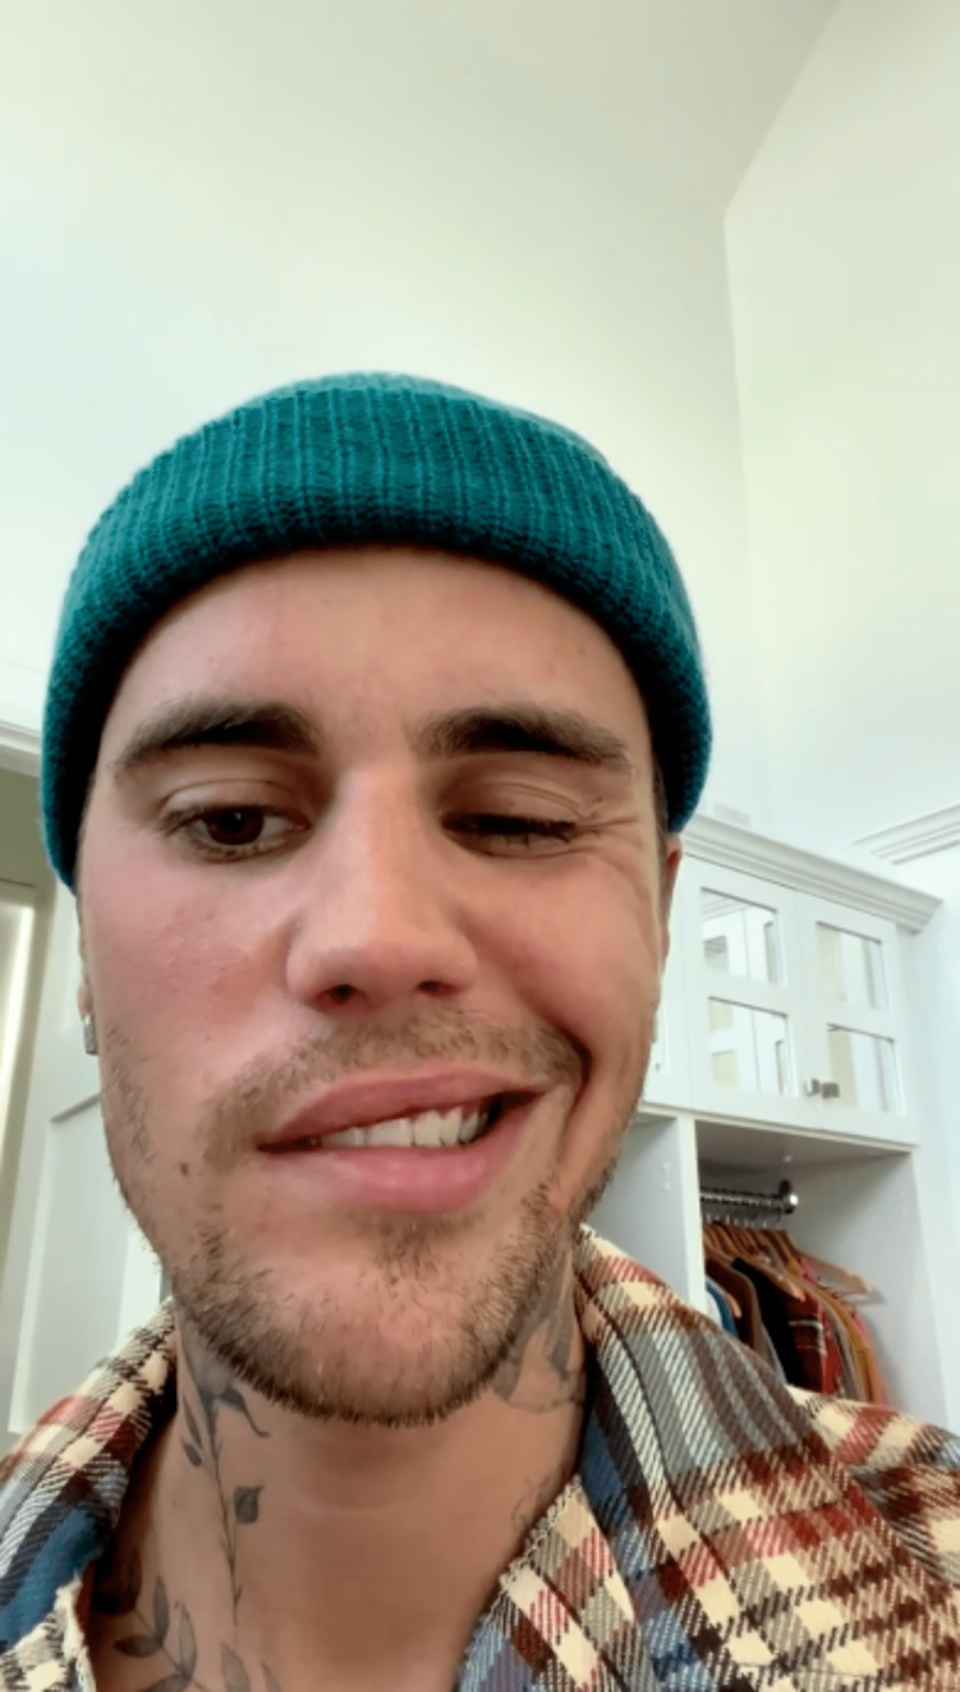 The singer showed how he could not move one side of his face during his June 2022 video. (Instagram/Justin Bieber)